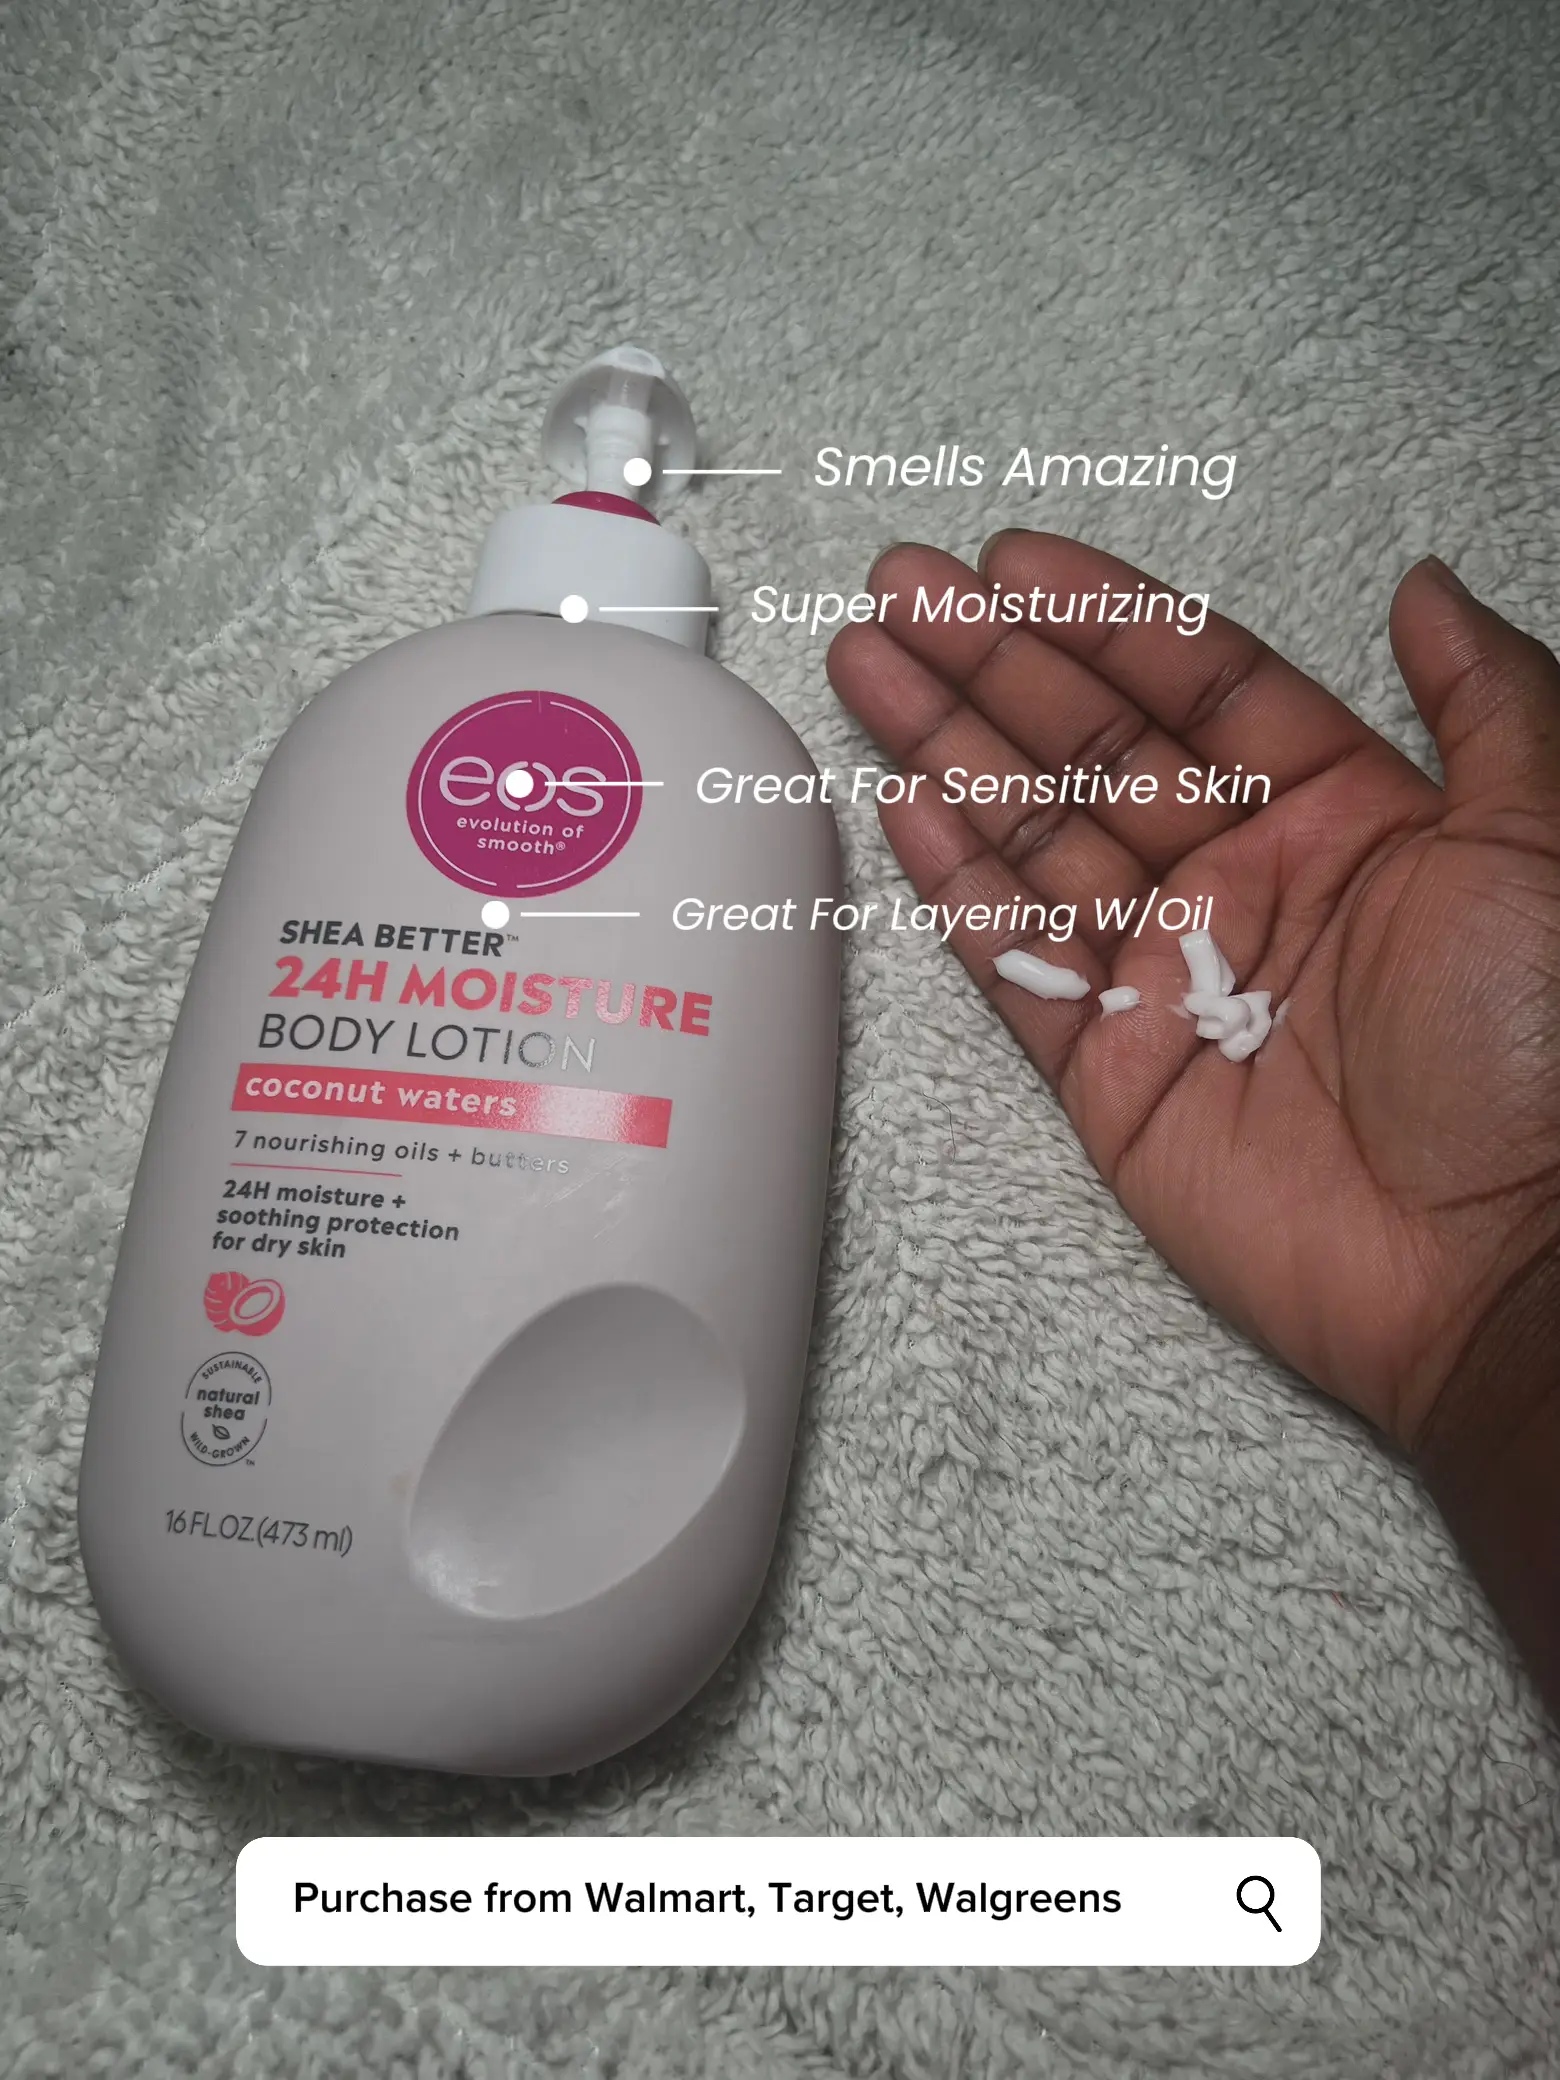 My Review of The EOS Body Lotion, Gallery posted by Bria Albert